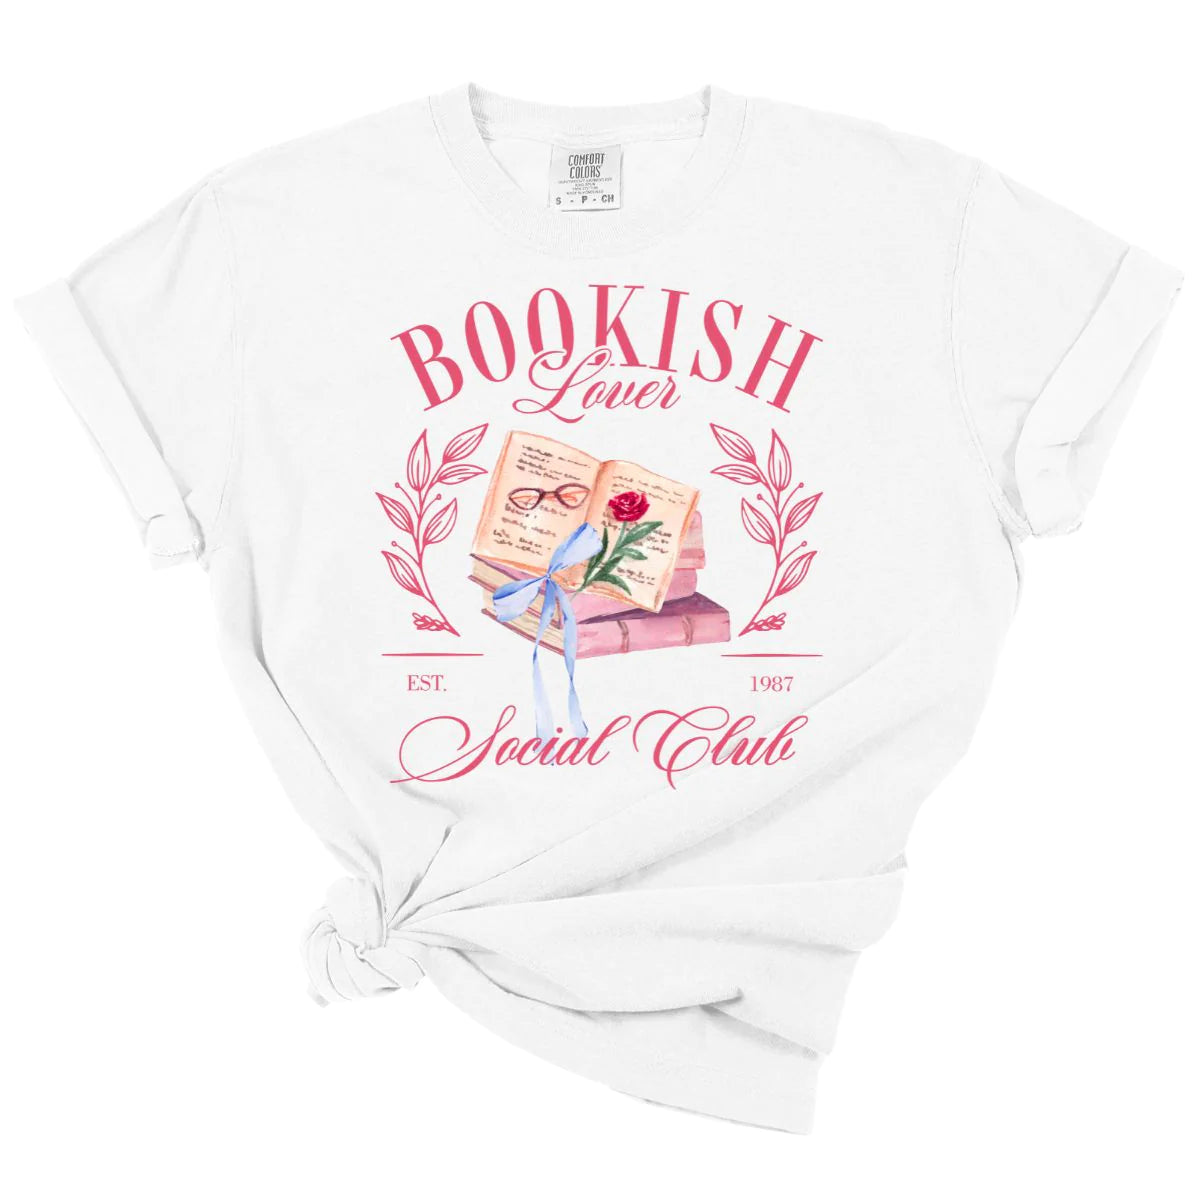 Bookish Lover Social Club Tee *MADE TO ORDER*